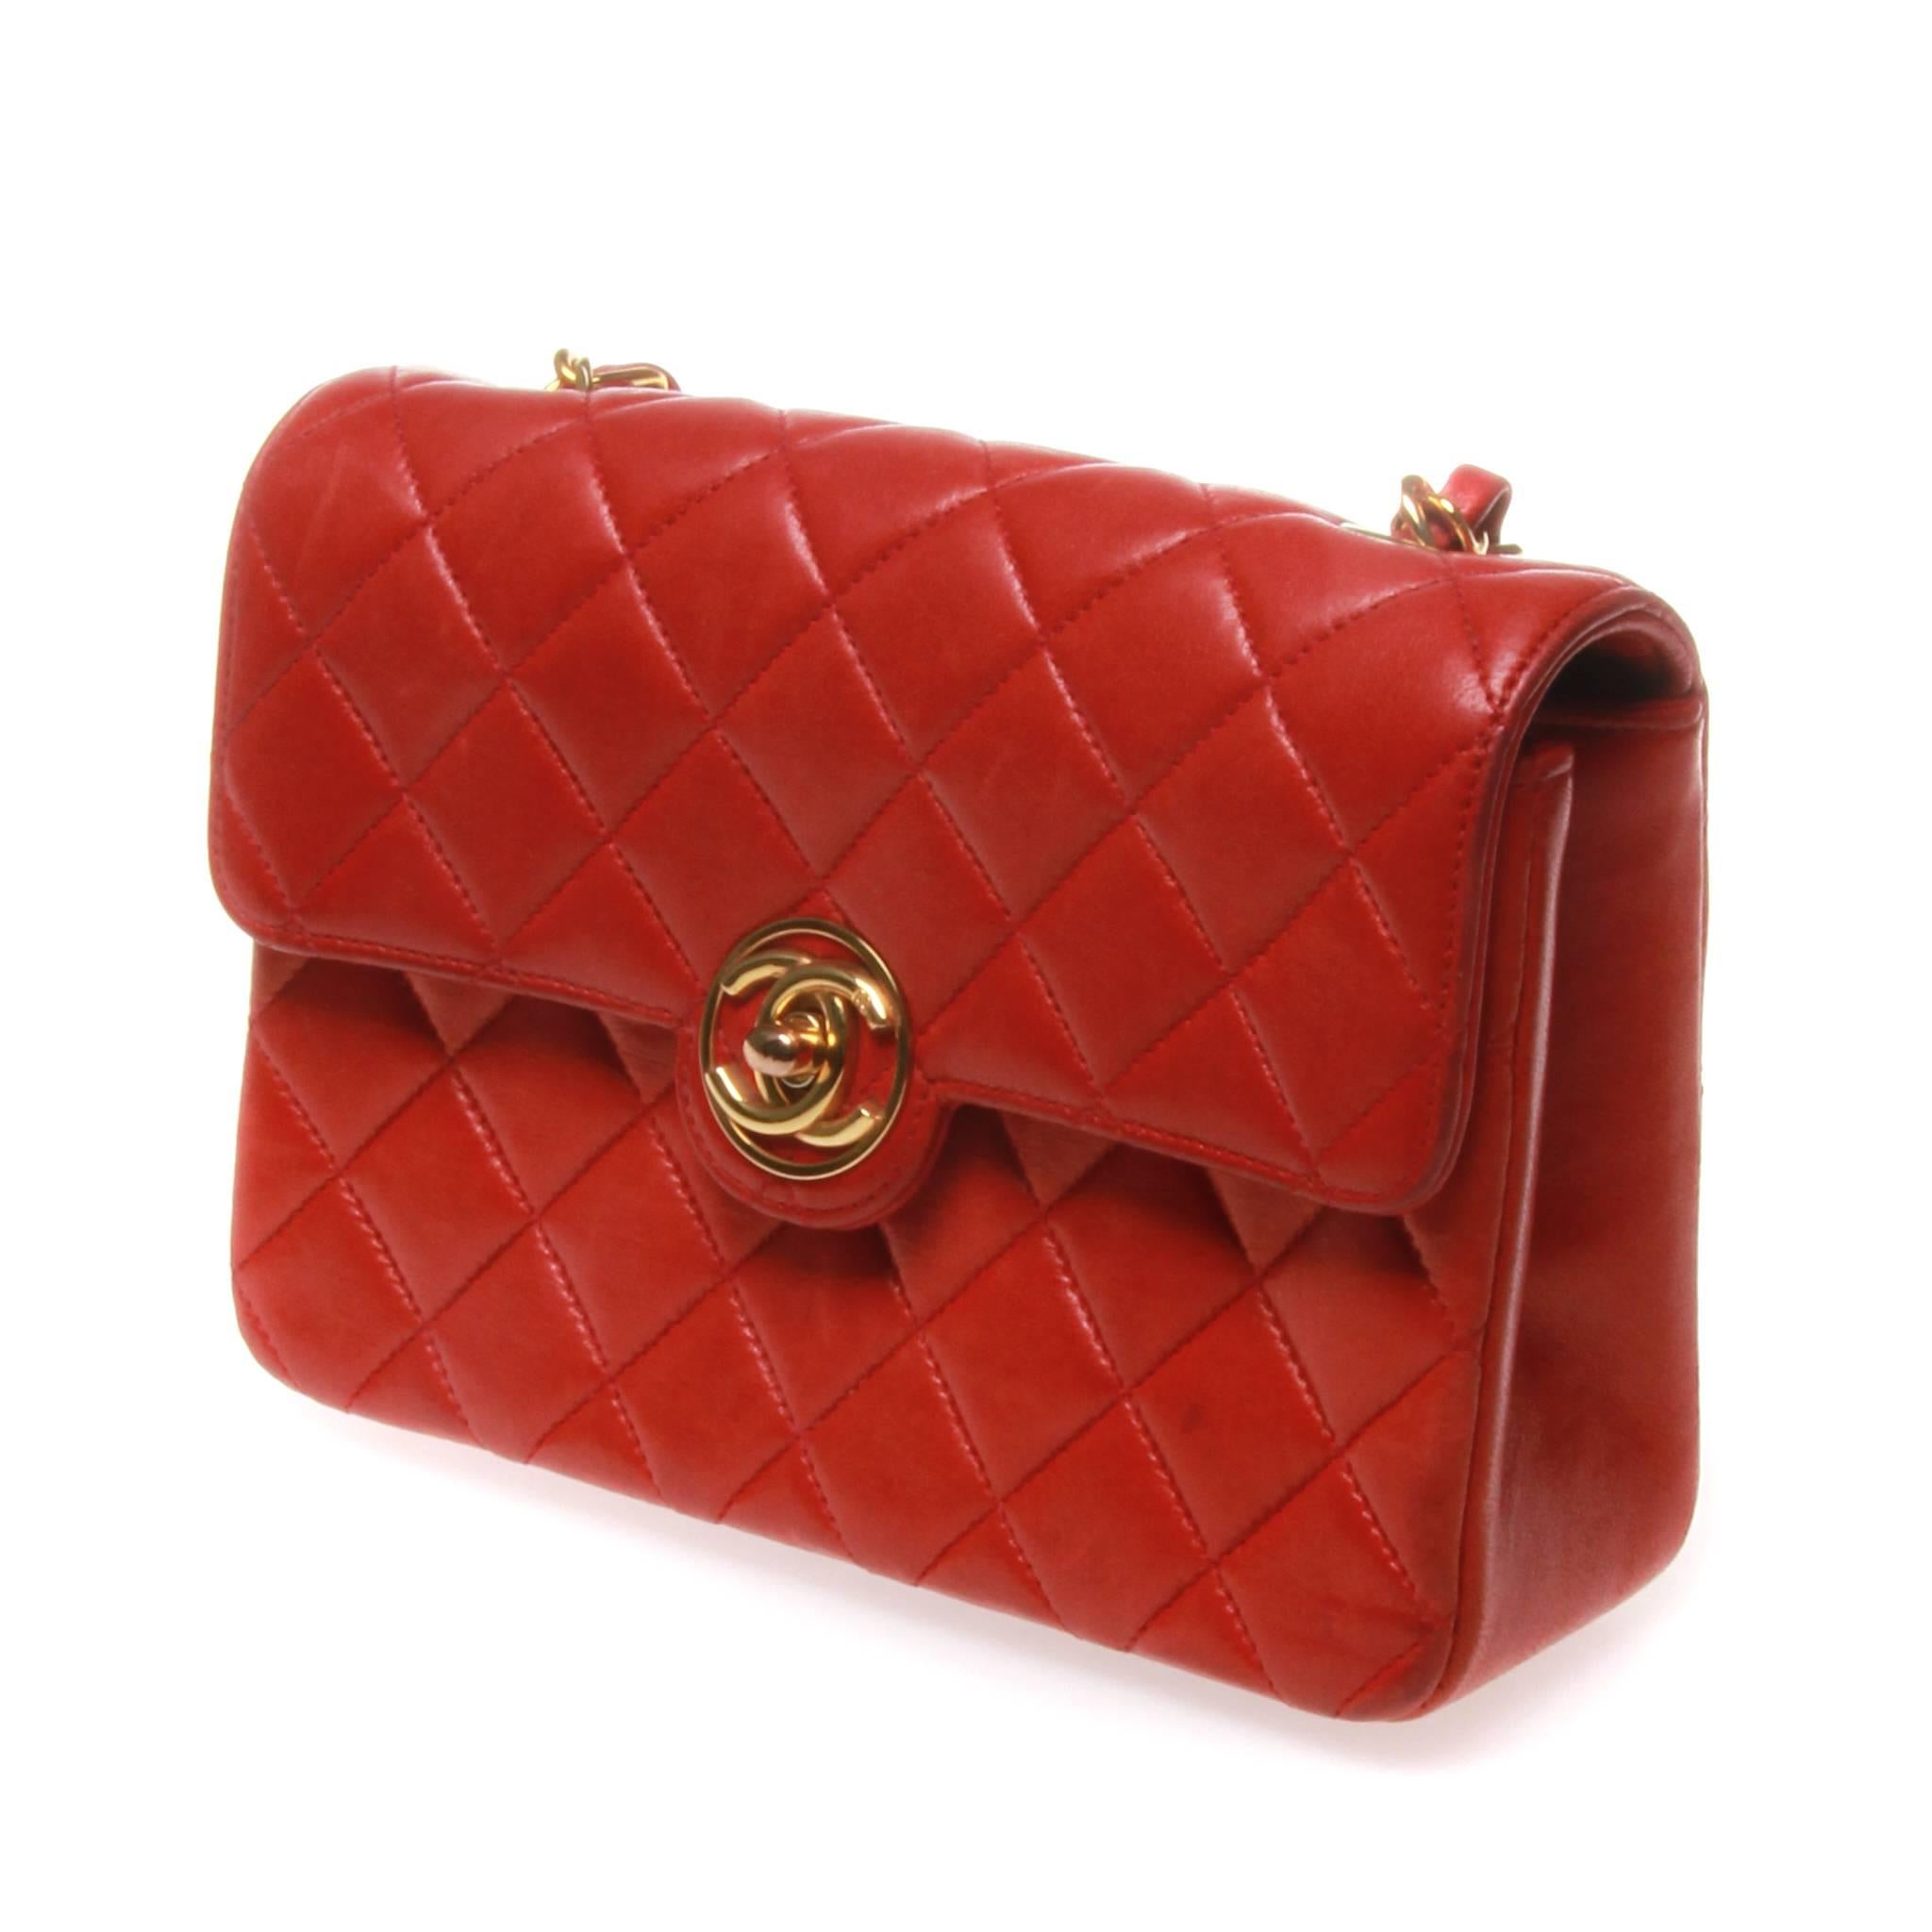 Vintage Chanel mini classic flap cross body bag in quilted red lambskin leather with gold hardware. The bag features the classic leather threaded chain shoulder strap and front flap with an encircled Chanel CC turn lock. This bag is in great vintage